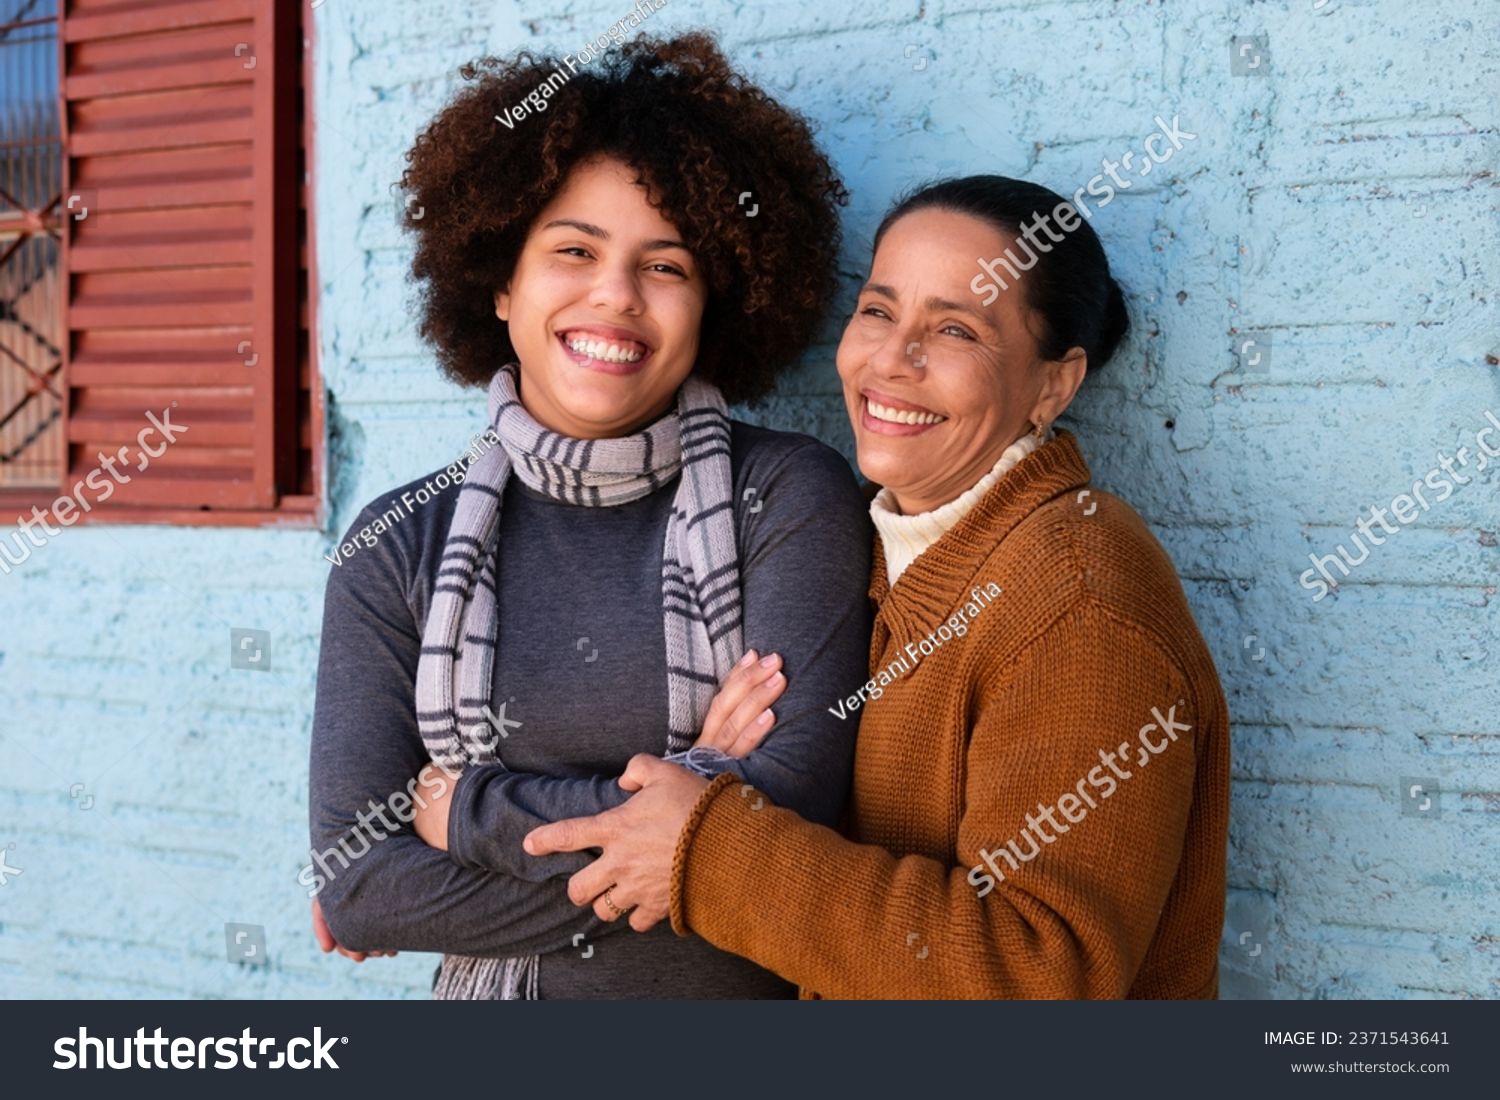 Happy cheerful black adult daughter and mother with broad smile embracing each other outside humble home Togetherness, family, support concept. #2371543641